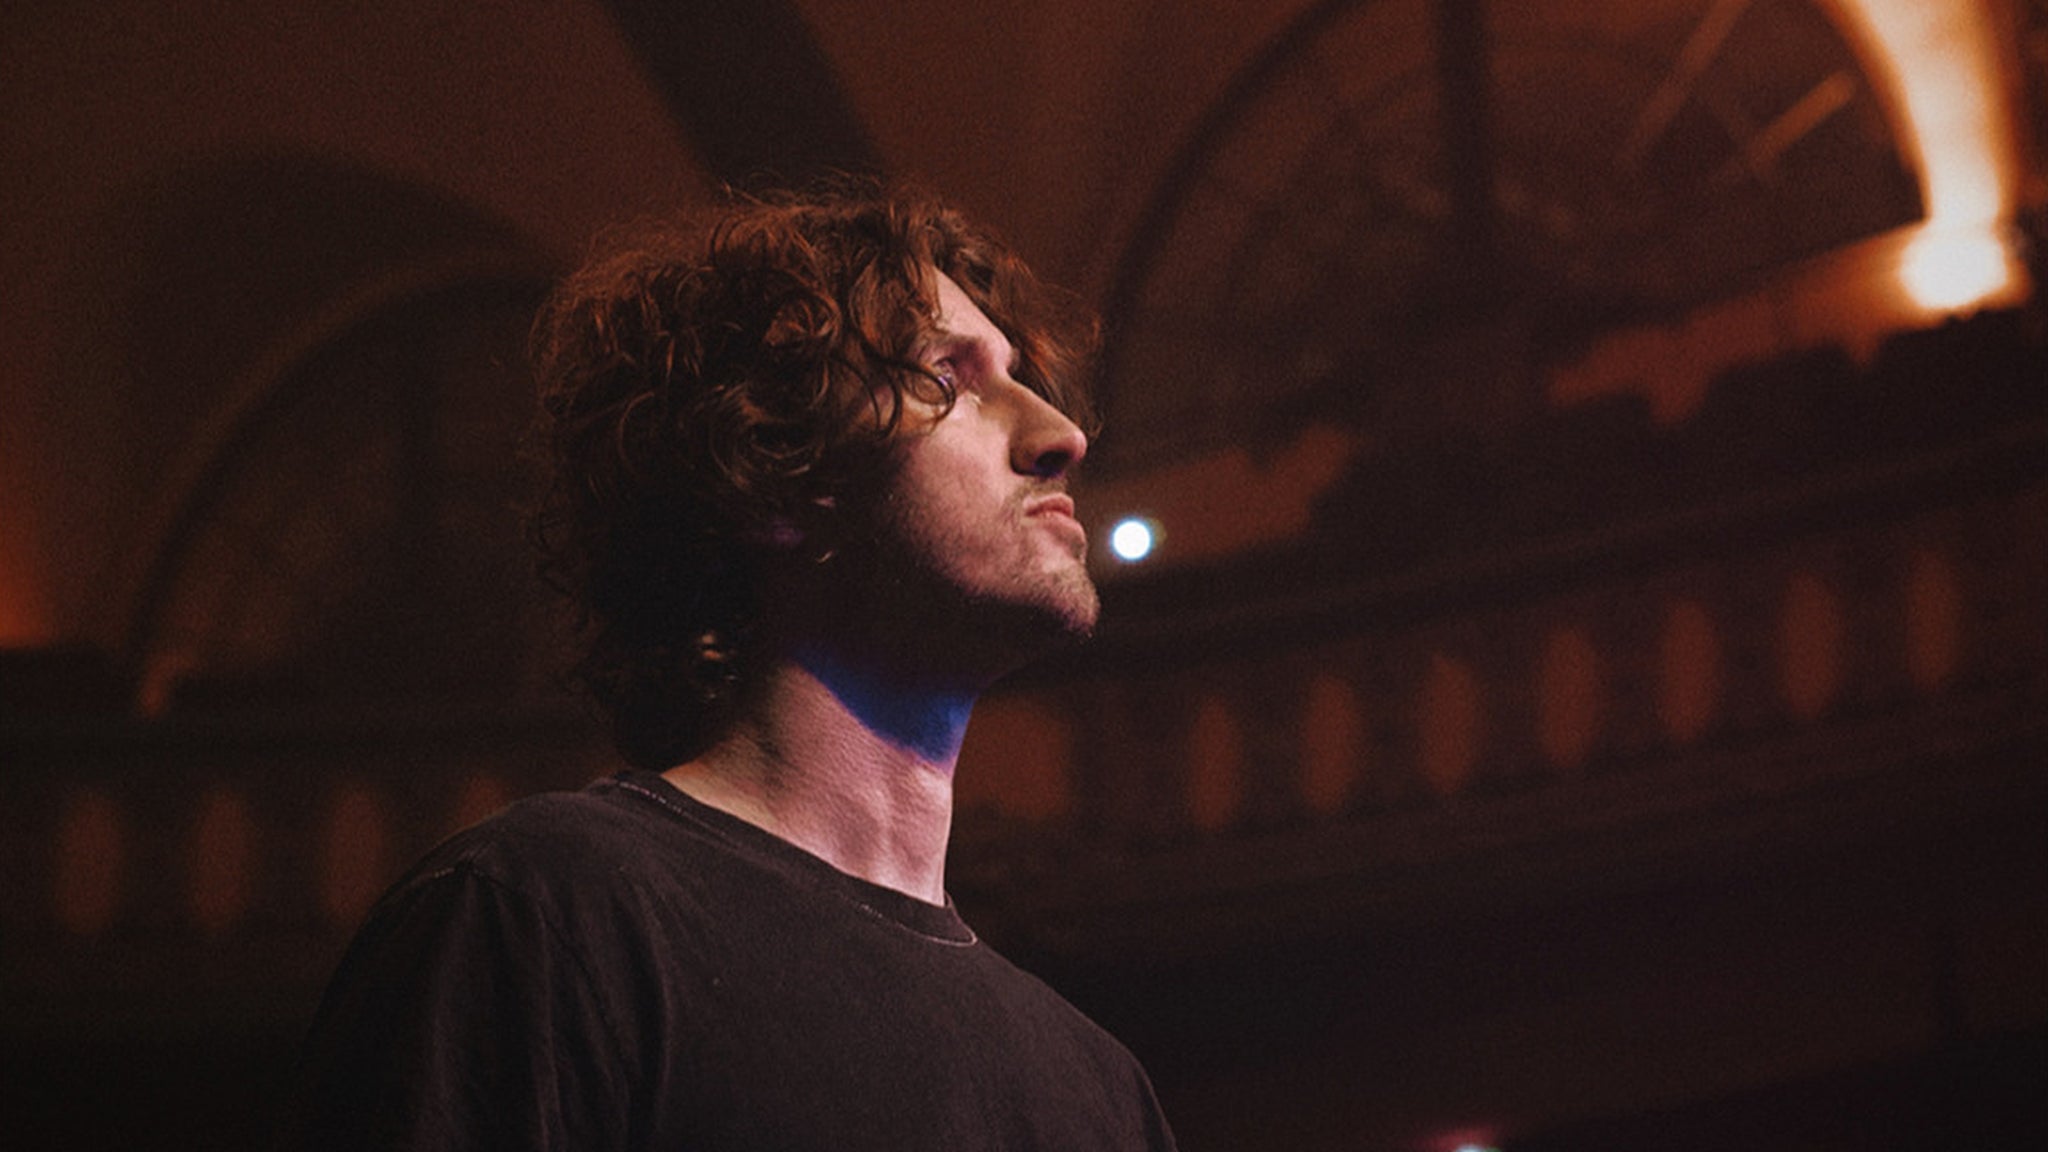 An Evening With: Dean Lewis in New York promo photo for Artist presale offer code